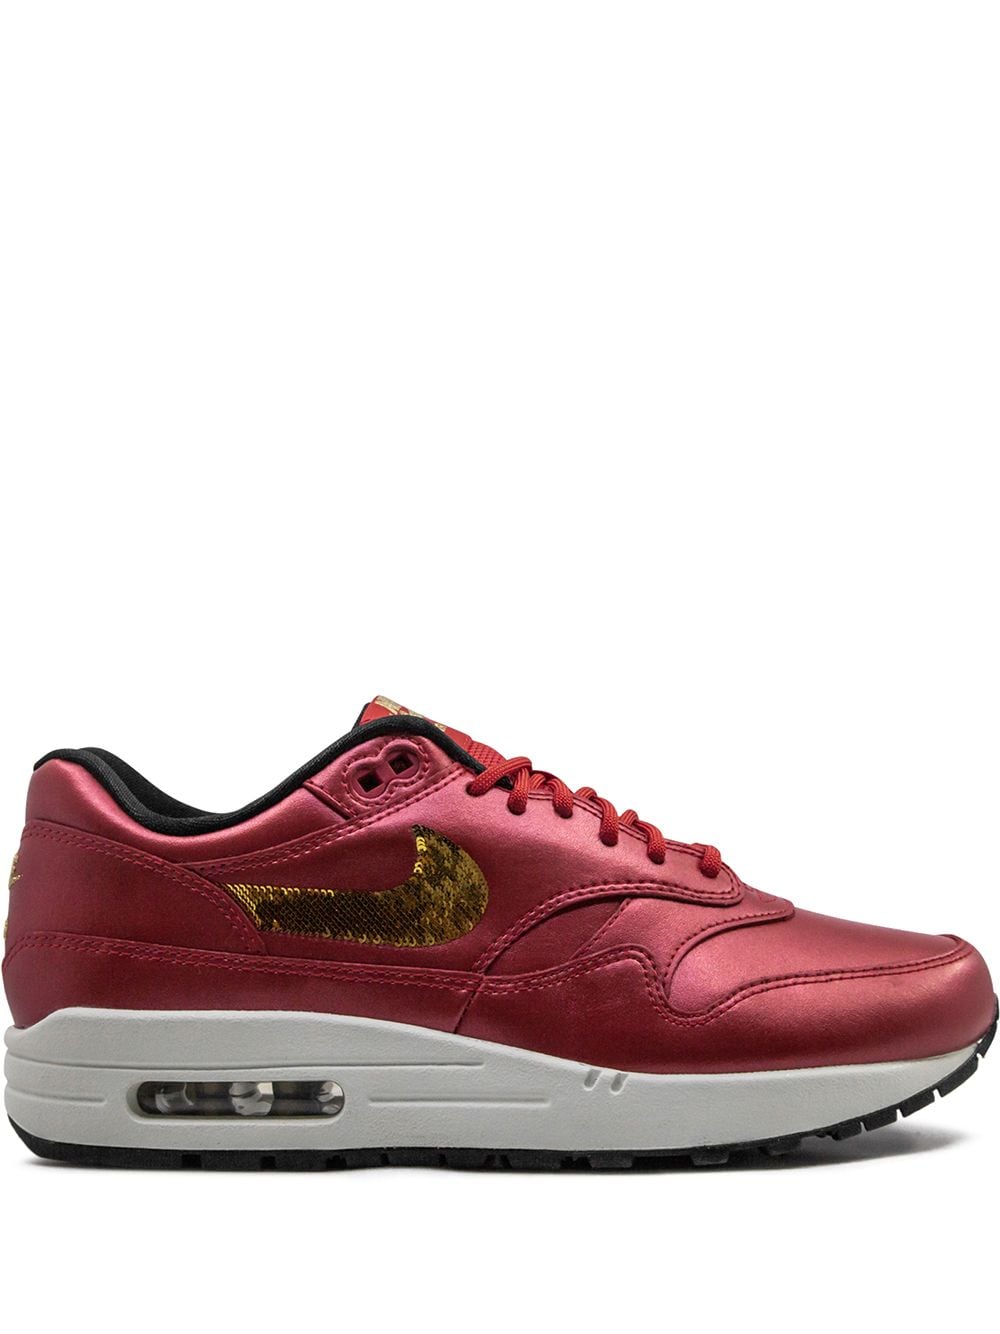 Nike Air Max 1 "Gold Sequins" sneakers - Red von Nike